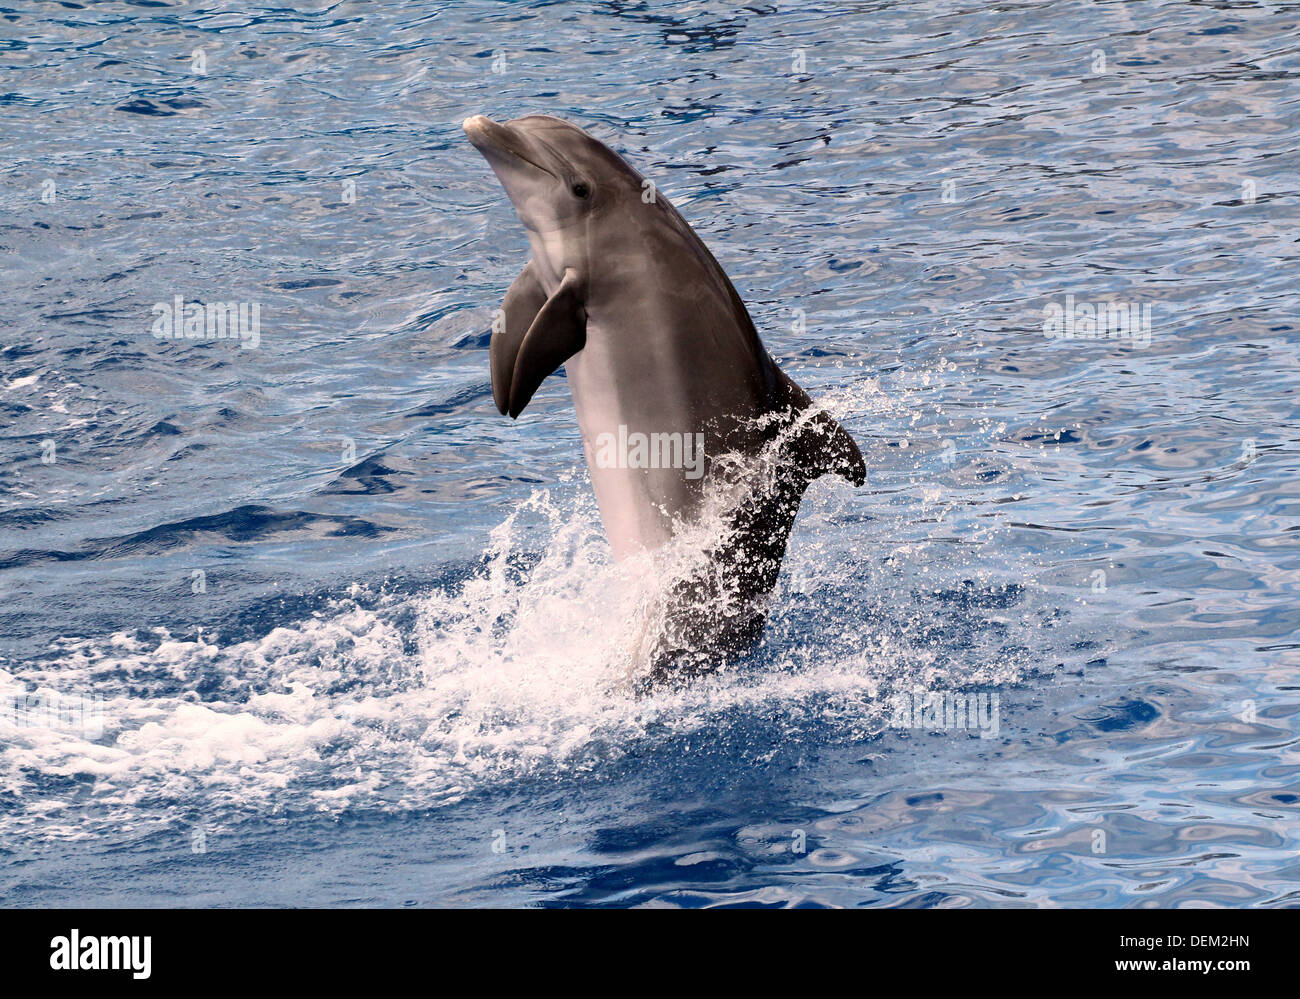 Series of 22 images of bottlenose dolphins performing at the Oceanografic Aquarium Marine Park in Valencia, Spain Stock Photo